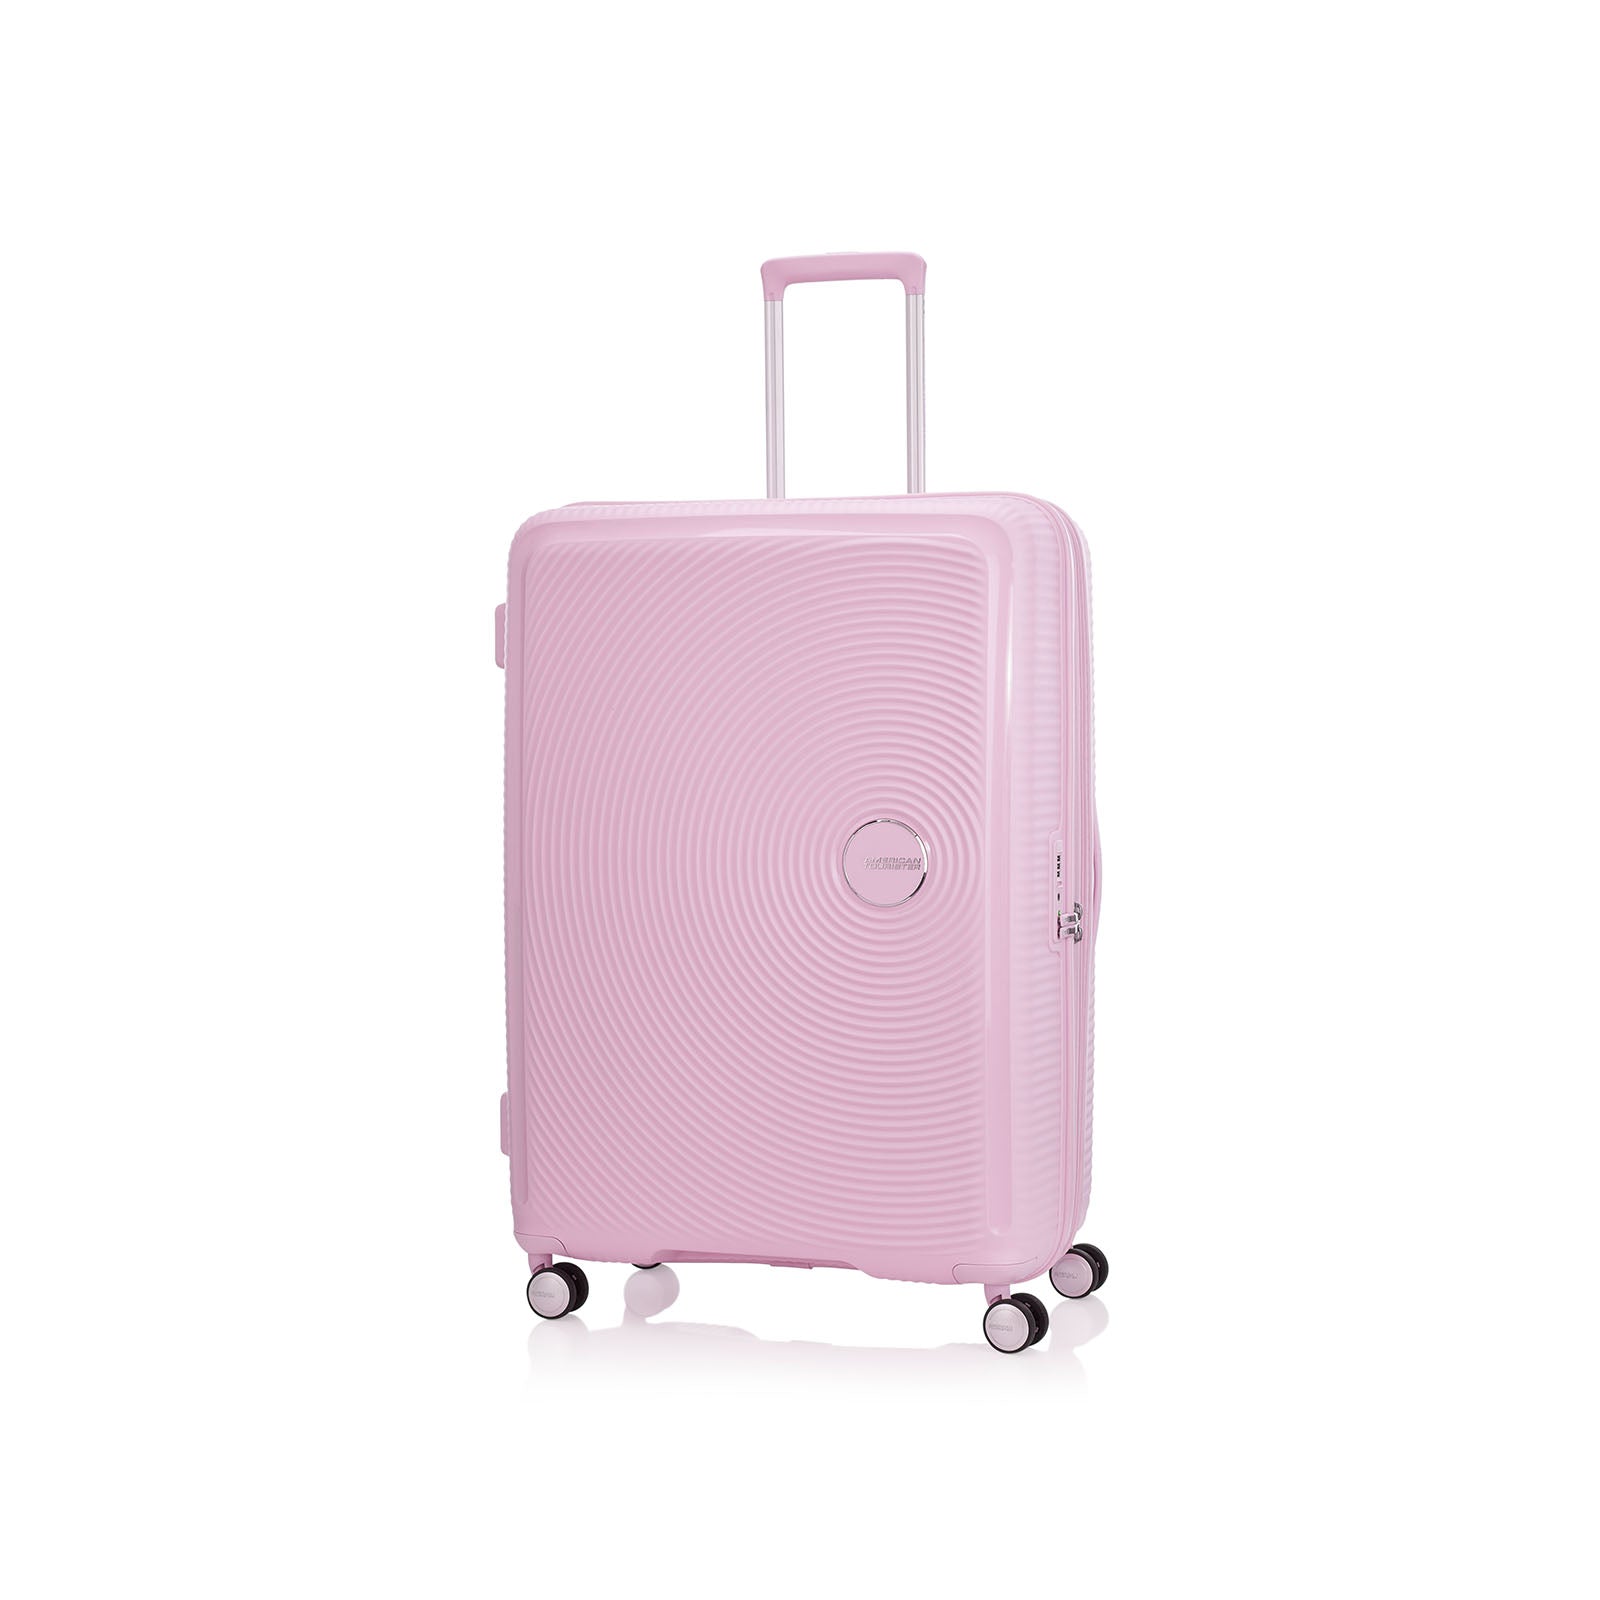 American-Tourister-Curio-2-80cm-Suitcase-Fresh-Pink-Front-Angle